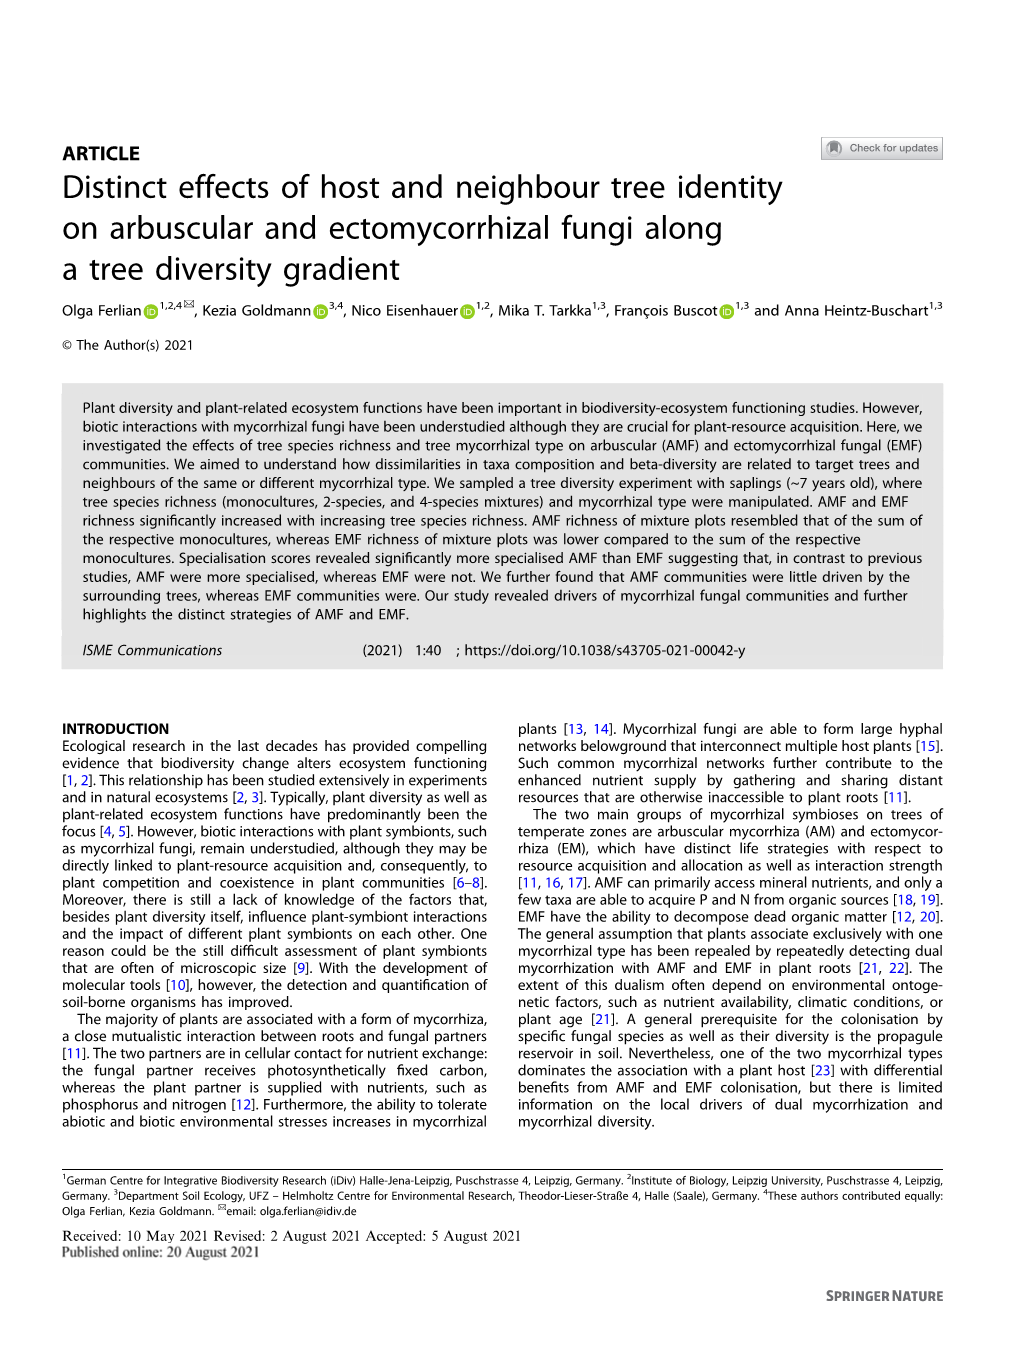 Distinct Effects of Host and Neighbour Tree Identity on Arbuscular and Ectomycorrhizal Fungi Along a Tree Diversity Gradient